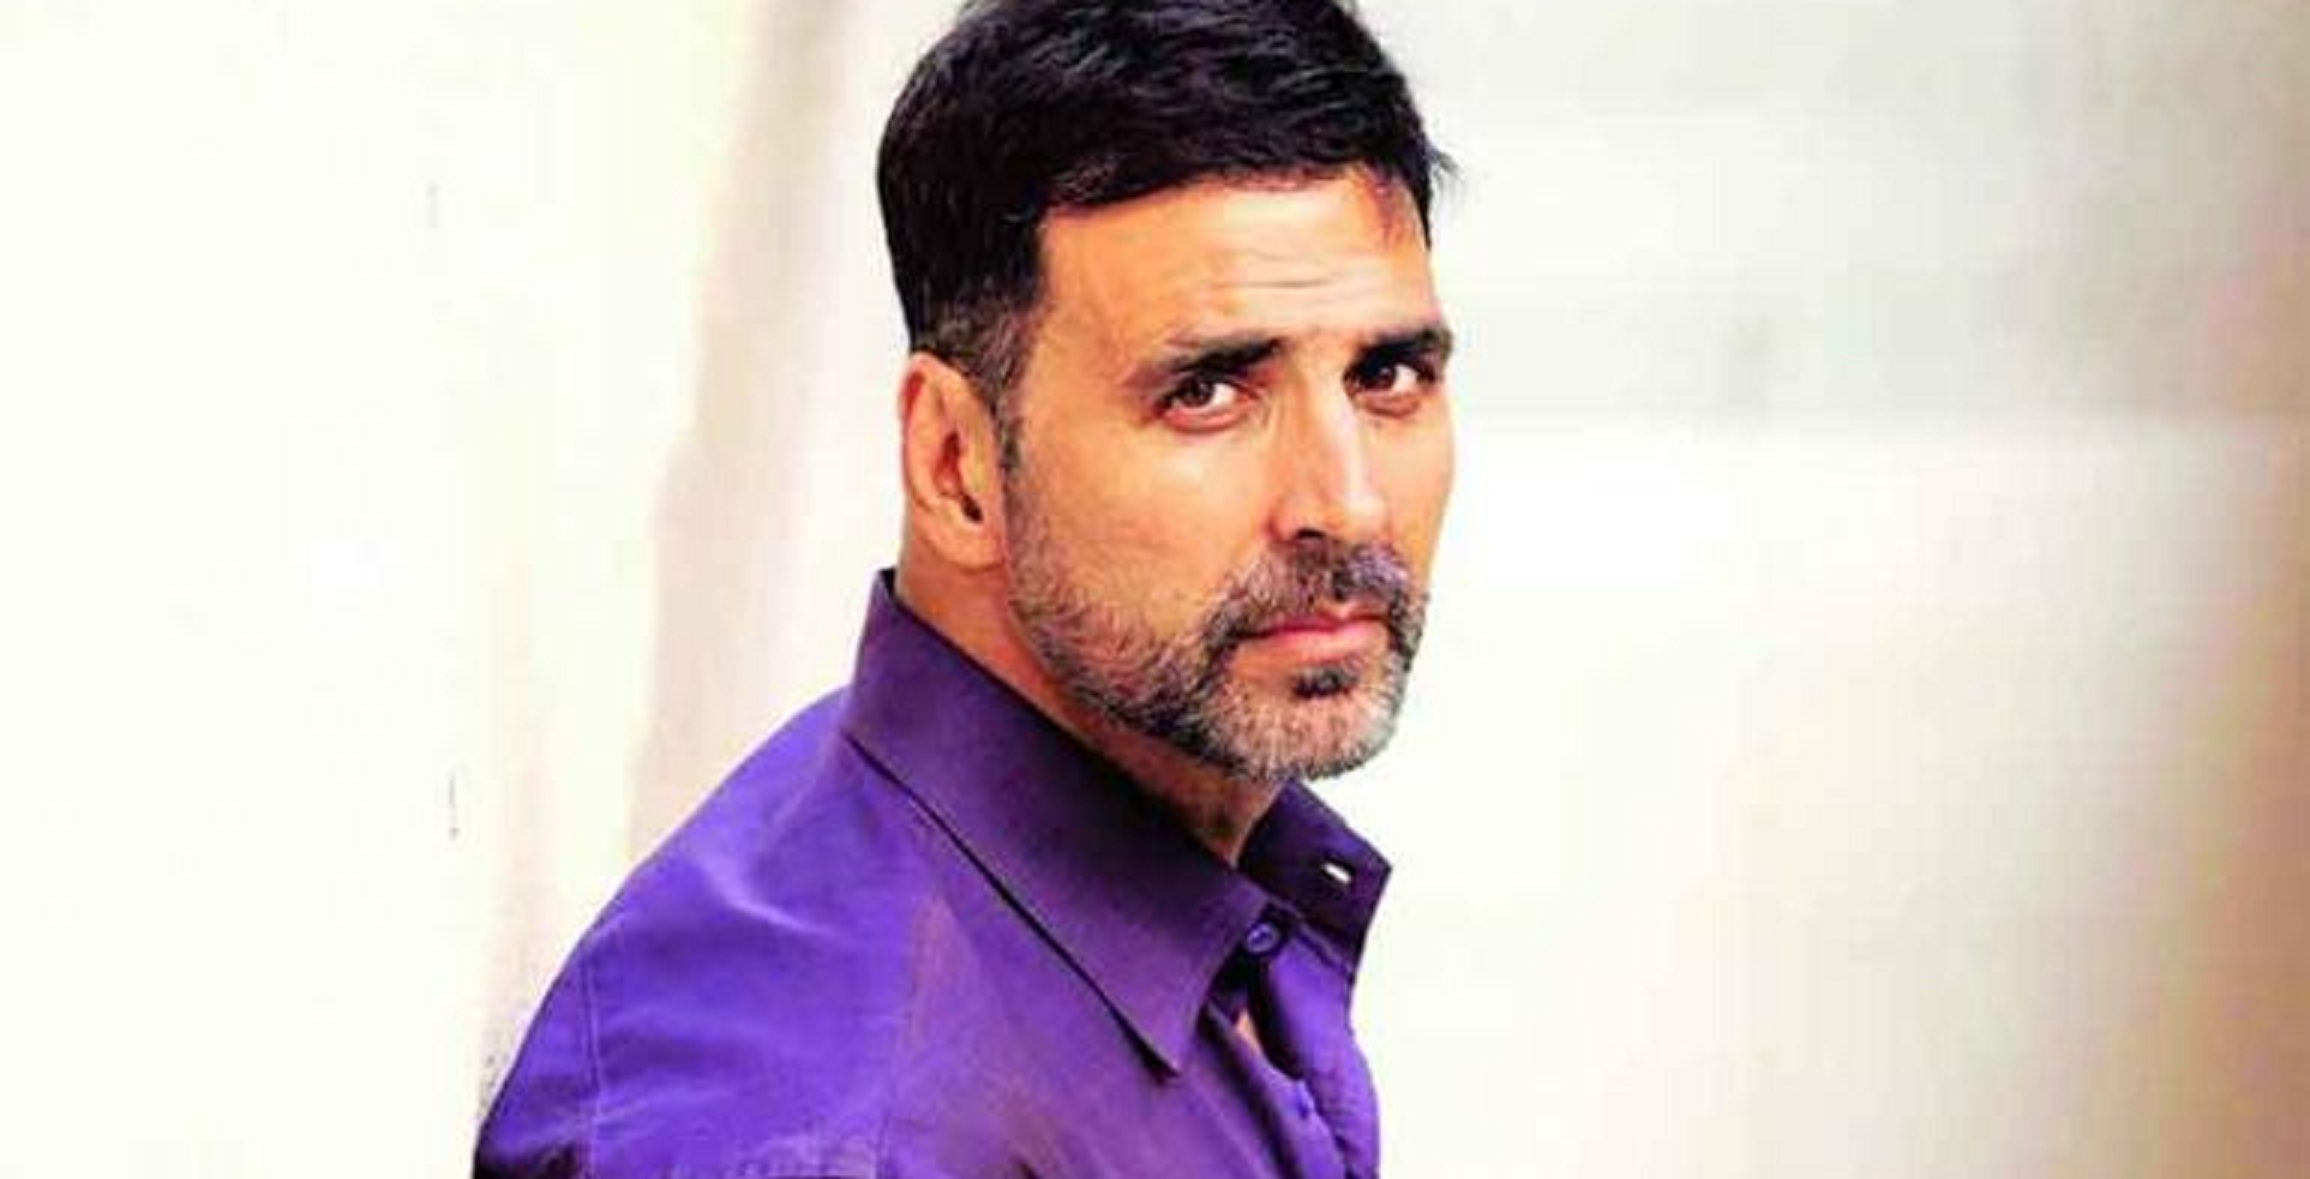 Akshay Kumar Finally Speaks About His “Canadian Passport”, Says ‘He’s Disappointed’